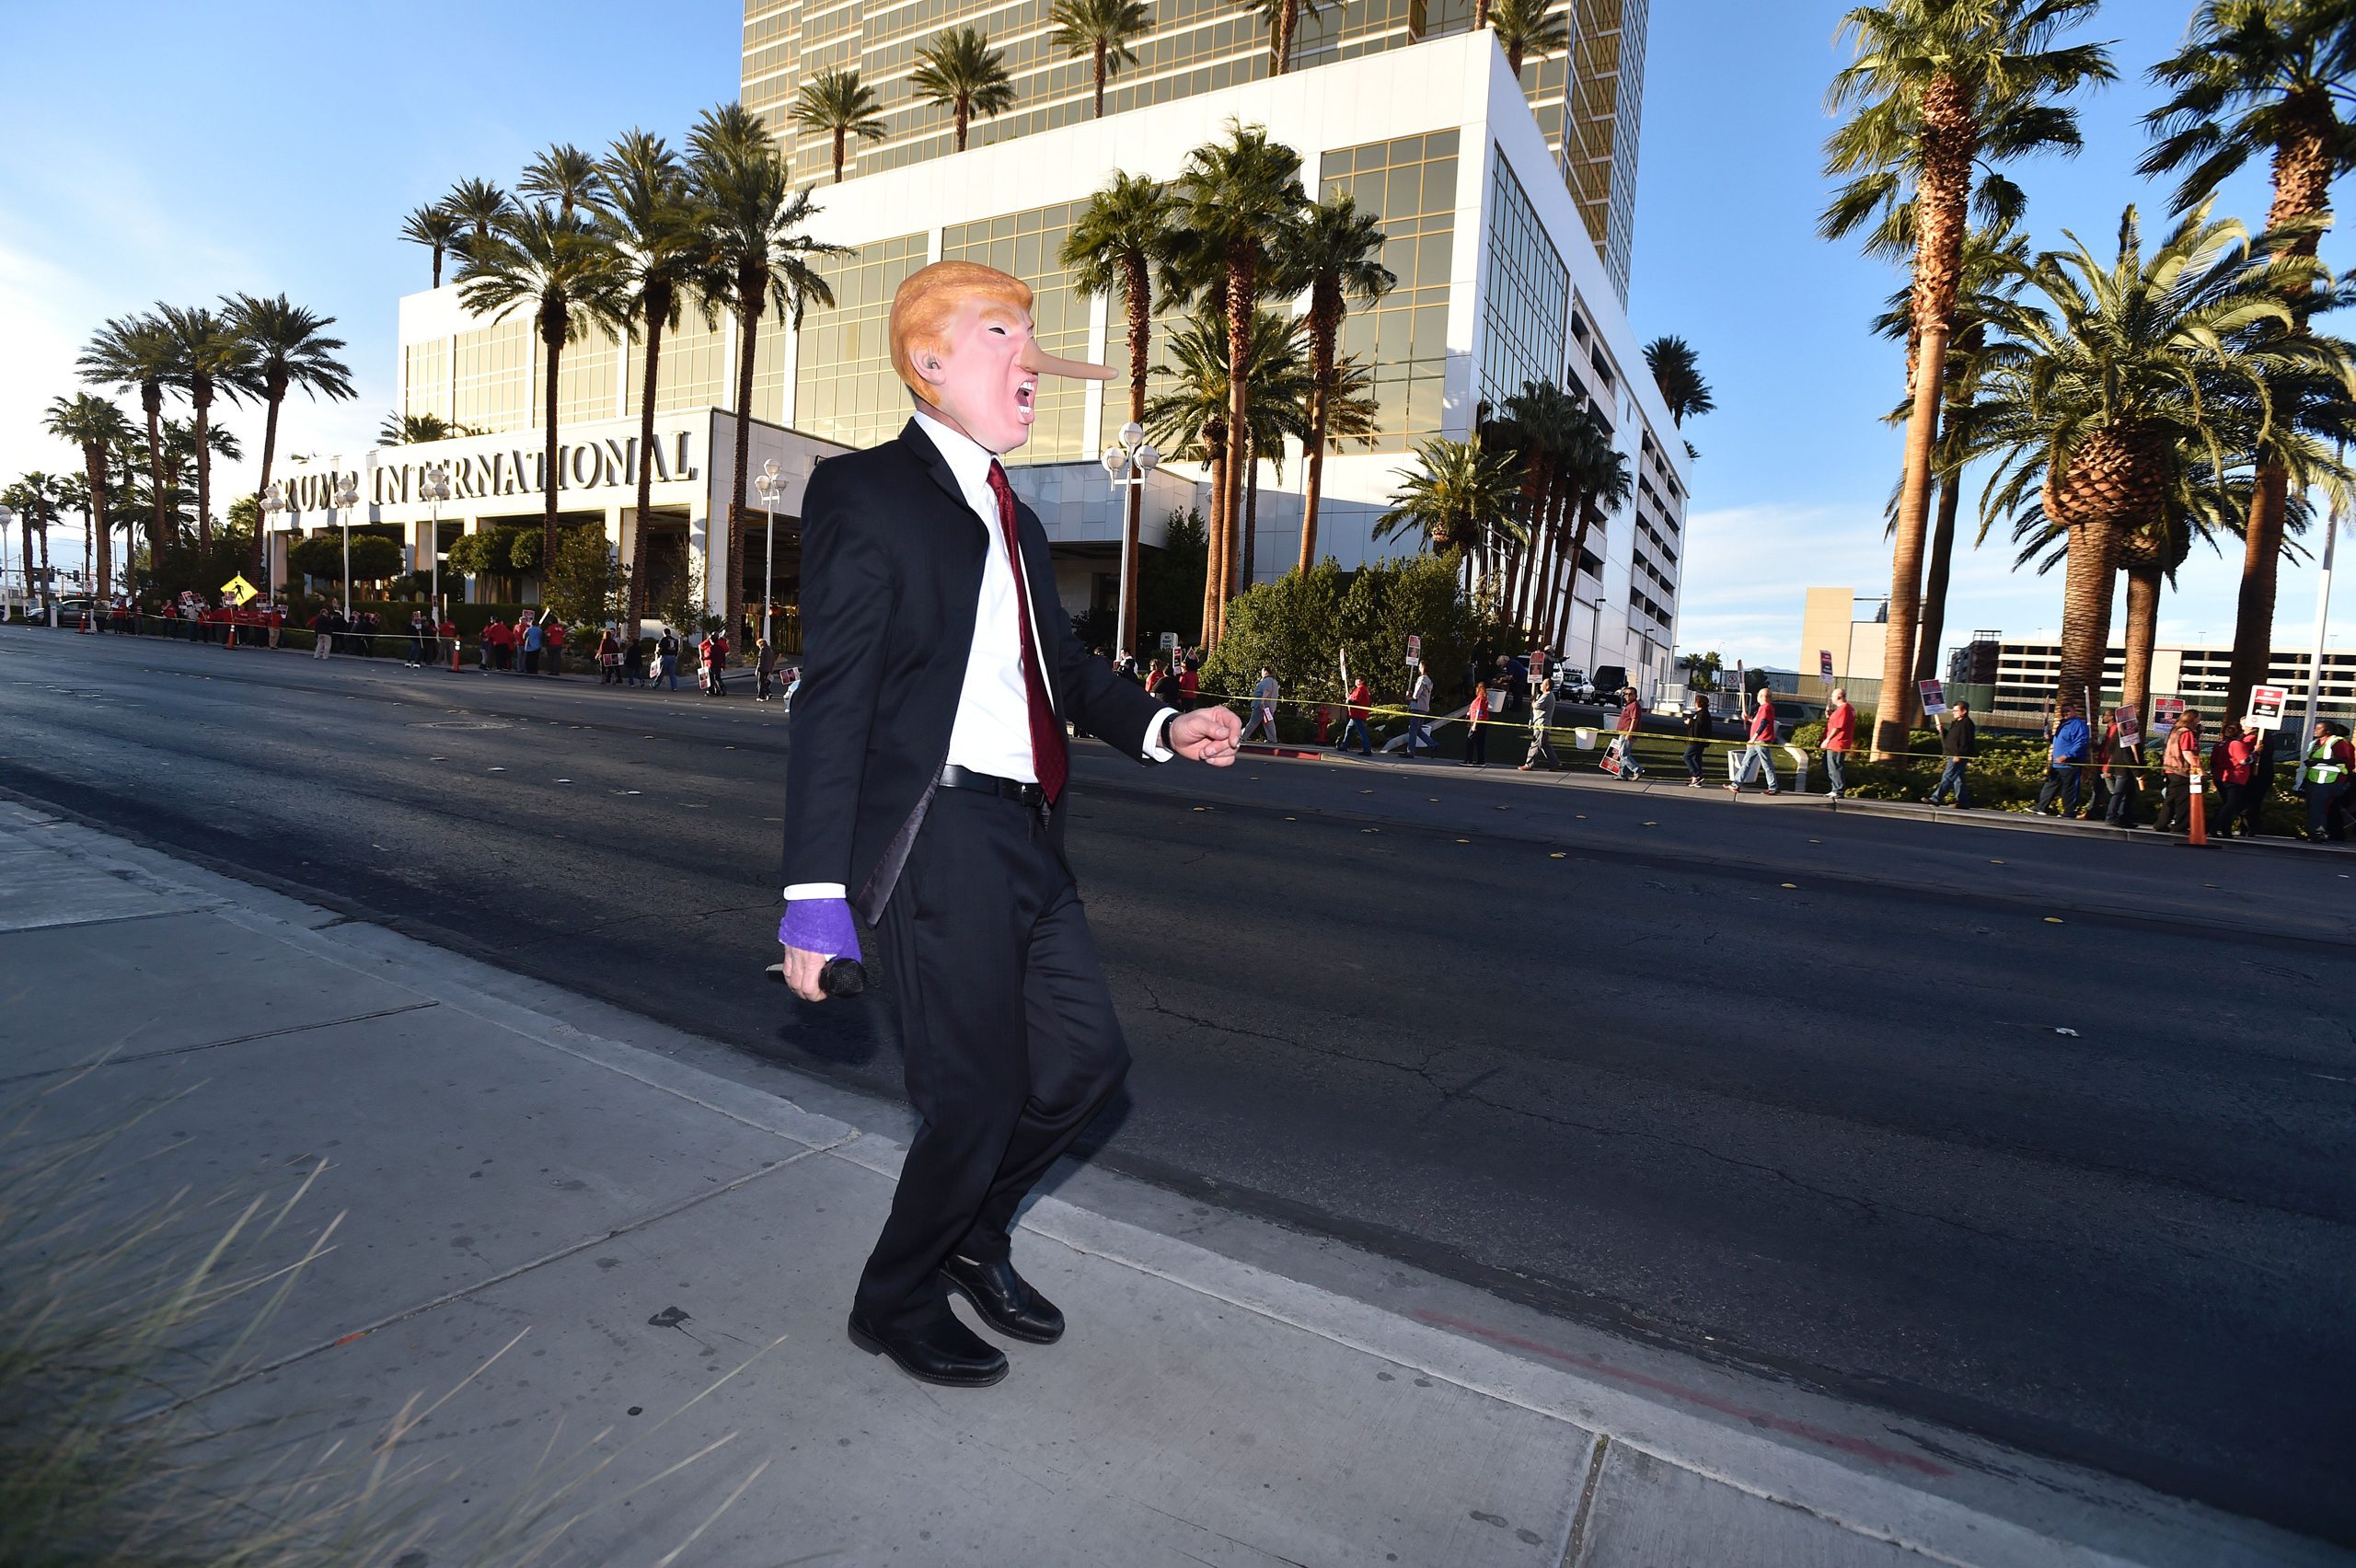 Gil Mobley wears a Donald Trump costume while singing a song about him as protesters rally in front of the Trump Hotel in Las Vegas on Feb. 23, 2016.